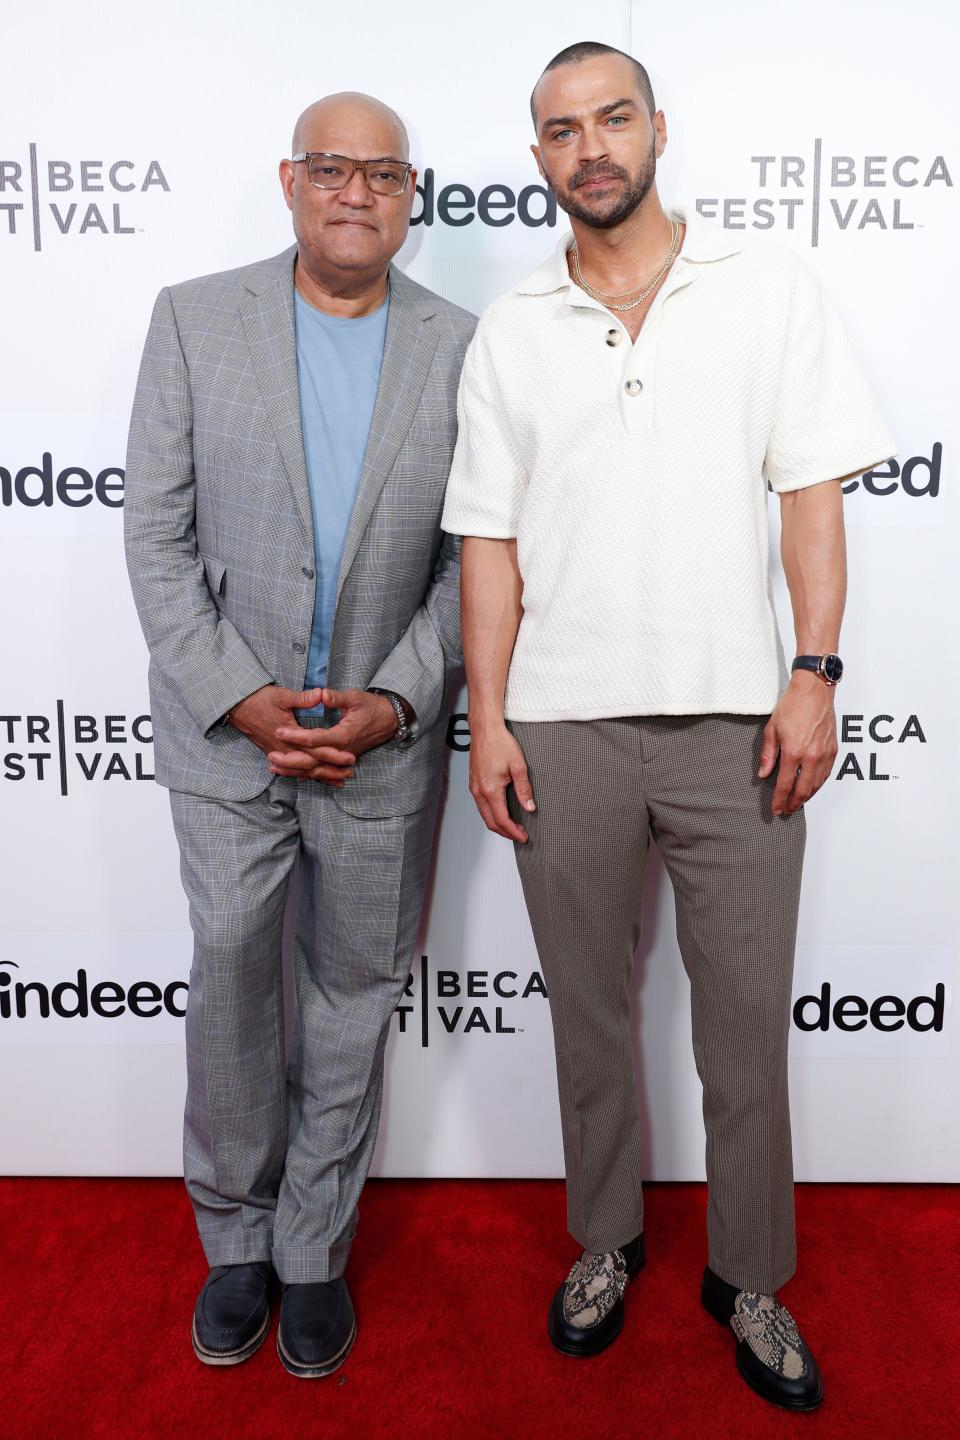 Laurence Fishburne and Jesse Williams attend "The Cave Of Adullam" premiere during the 2022 Tribeca Festival at Village East Cinema on June 13, 2022 in New York City.